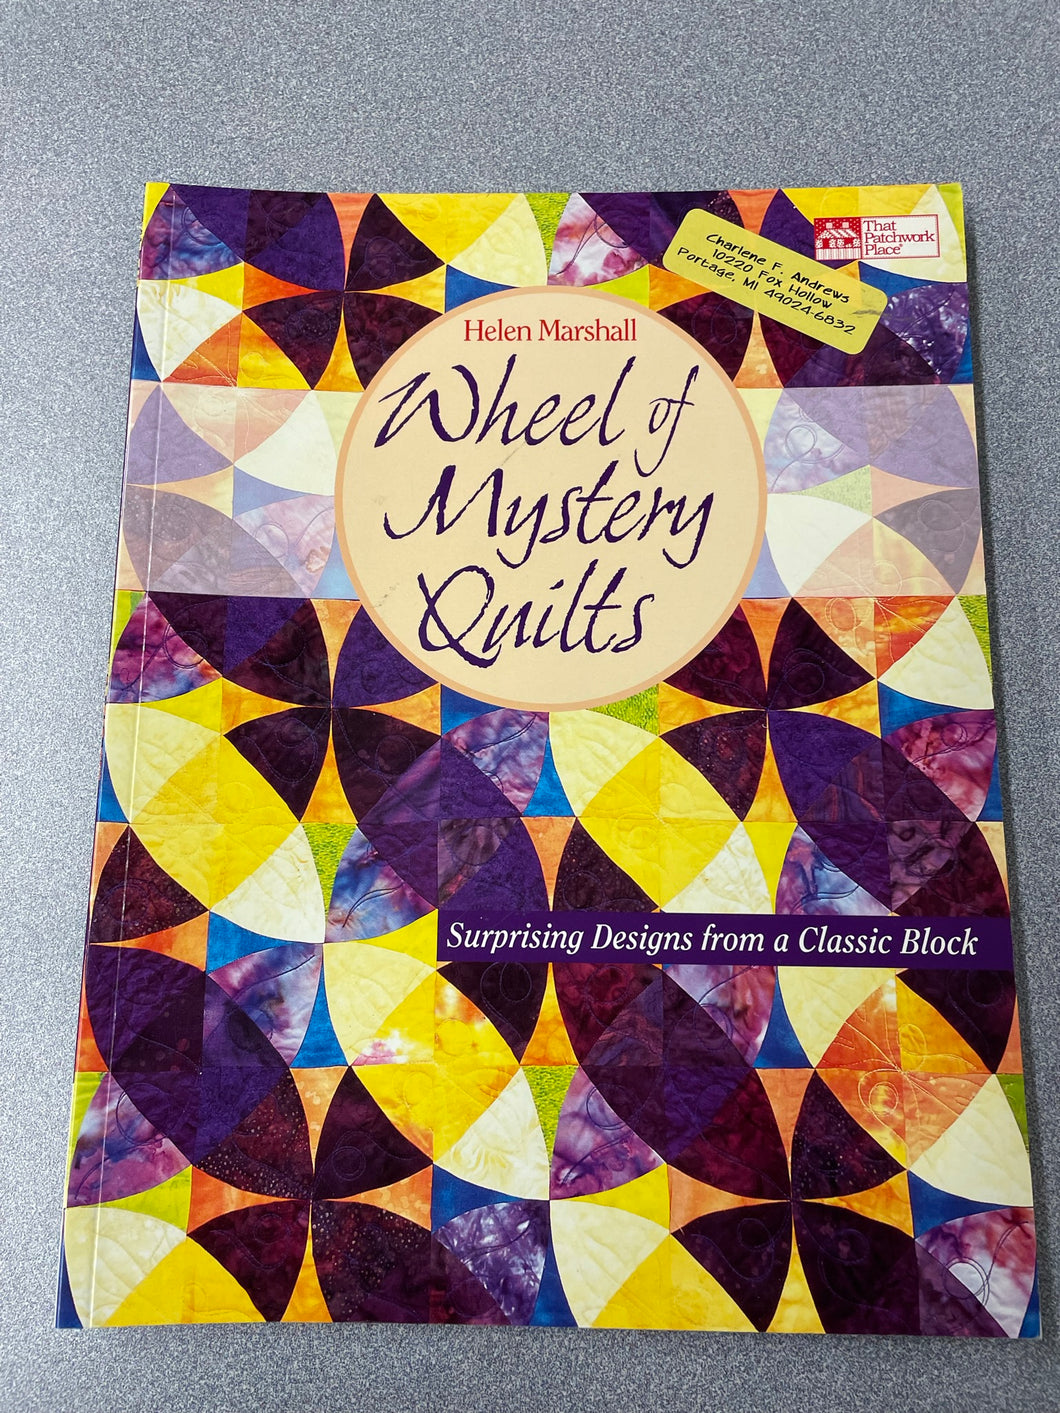 Wheel of Mystery Quilts: Surprising Designs From a Classic Block, Marshall, Helen [2006] CG 12/22